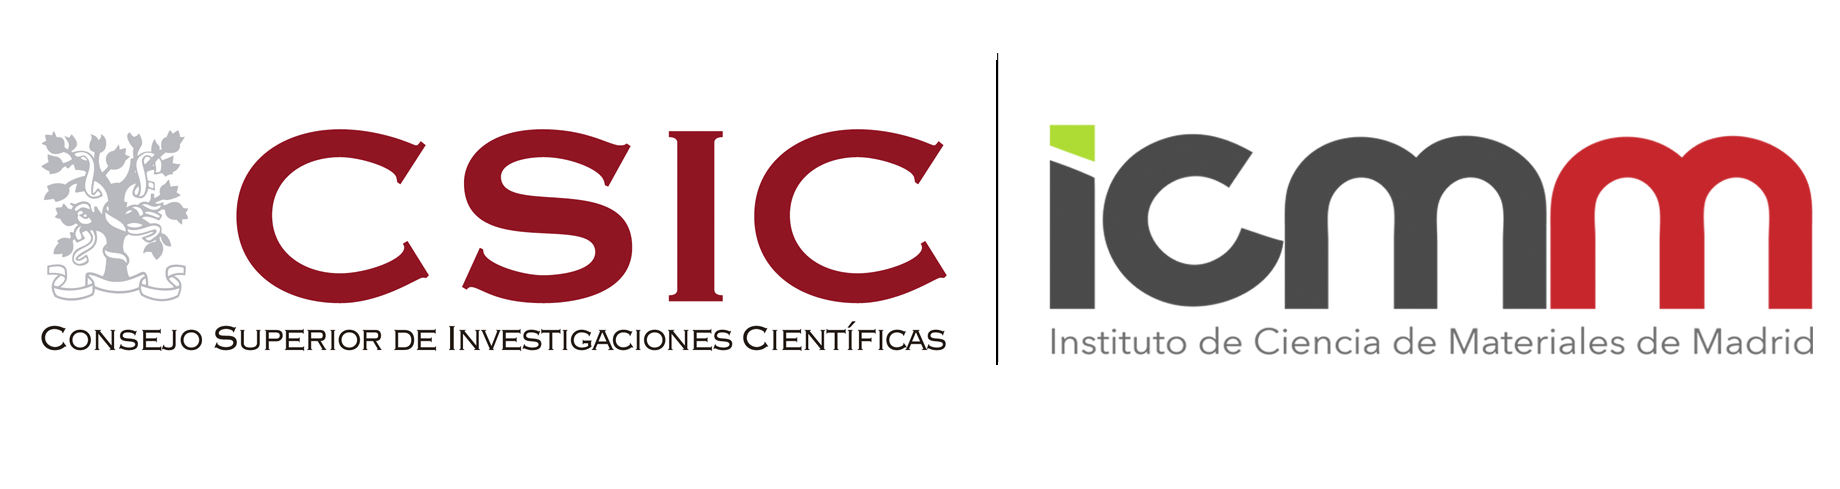 CSIC-ICMM:  SPANISH NATIONAL RESEARCH COUNCIL (CSIC), MATERIALS SCIENCE INSTITUTE OF MADRID (ICMM)